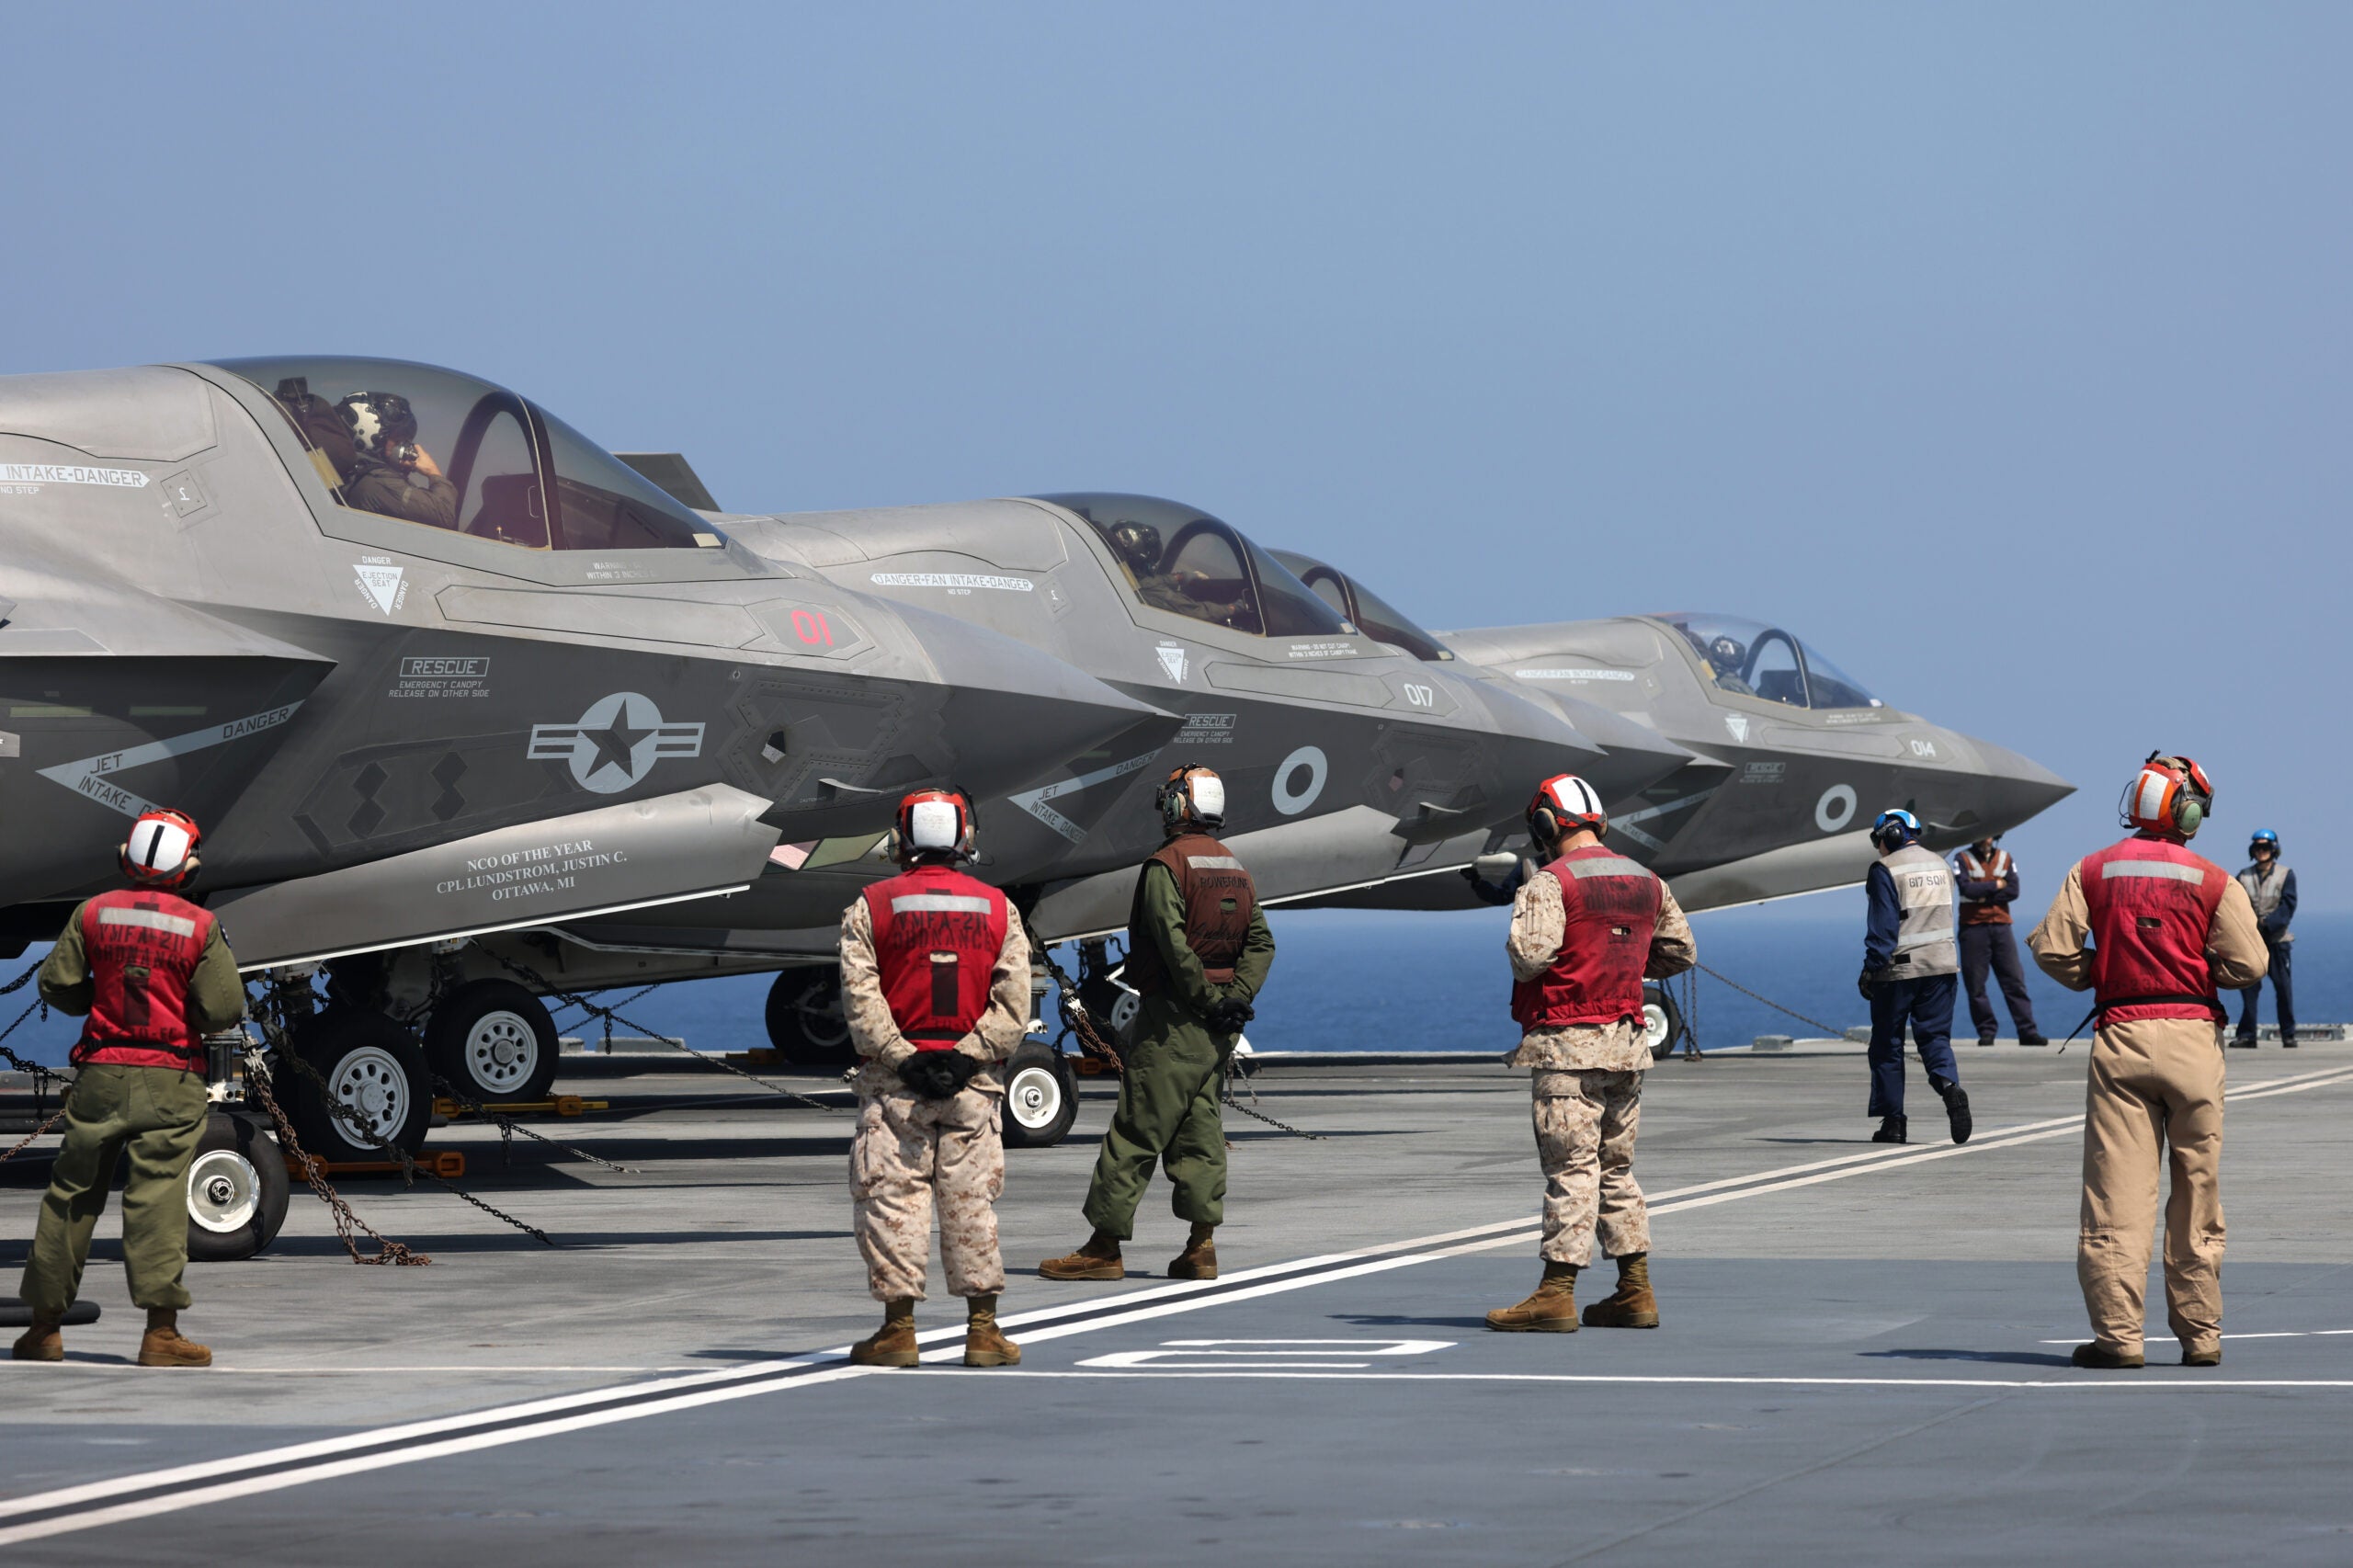 Pictured: UK and US F-35B Lightning Jets (and their UK and US deck crew) prepare to take off from HMS Queen Elizabeth to cross deck to USS Essex

On 8th November 2021, aircraft from HMS Queen Elizabeth and USS Essex cross deck while in the Arabian Sea. 

Marine Fighter Attack Squadron (VMFA) 211 cross-decked F35-B Lightning Jets from HMS Queen Elizabeth to amphibious assault ship USS Essex. Simultaneously, MV-22B Osprey, UH-1Y Venoms and AH-1Z Vipers from USS Essex crossed deck to HMS Queen Elizabeth. 

Aircraft attached to Marine Medium Tiltrotor Squadron (VMM) 165 (Reinforced), 11th Marine Expeditionary Unit, landed on HMS Queen Elizabeth demonstrating increased interoperability, information sharing, and expanded access across the region as allies, as well as credible and capable forces operating in the U.S. 5th Fleet area of operations.

HMS Queen Elizabeth is the deployed flag ship for Carrier Strike Group 21(CSG21). CSG21 will see the ship along with the Strike Group work with over 40 countries from around the world. The Strike Group will operate and exercise with other Countries Navies and Air Forces during the 7 month deployment. 

The Strike Group includes ships from the United States Navy, The Dutch Navy, and Marines from the US Marine Corps. As well as UK Frigates, Destroyers two RFA supply ships and air assets from 617 Sqn, 820 NAS, 815 NAS and 845 NAS. This will be the largest deployment of Fifth Generation Fighter Jets in history.